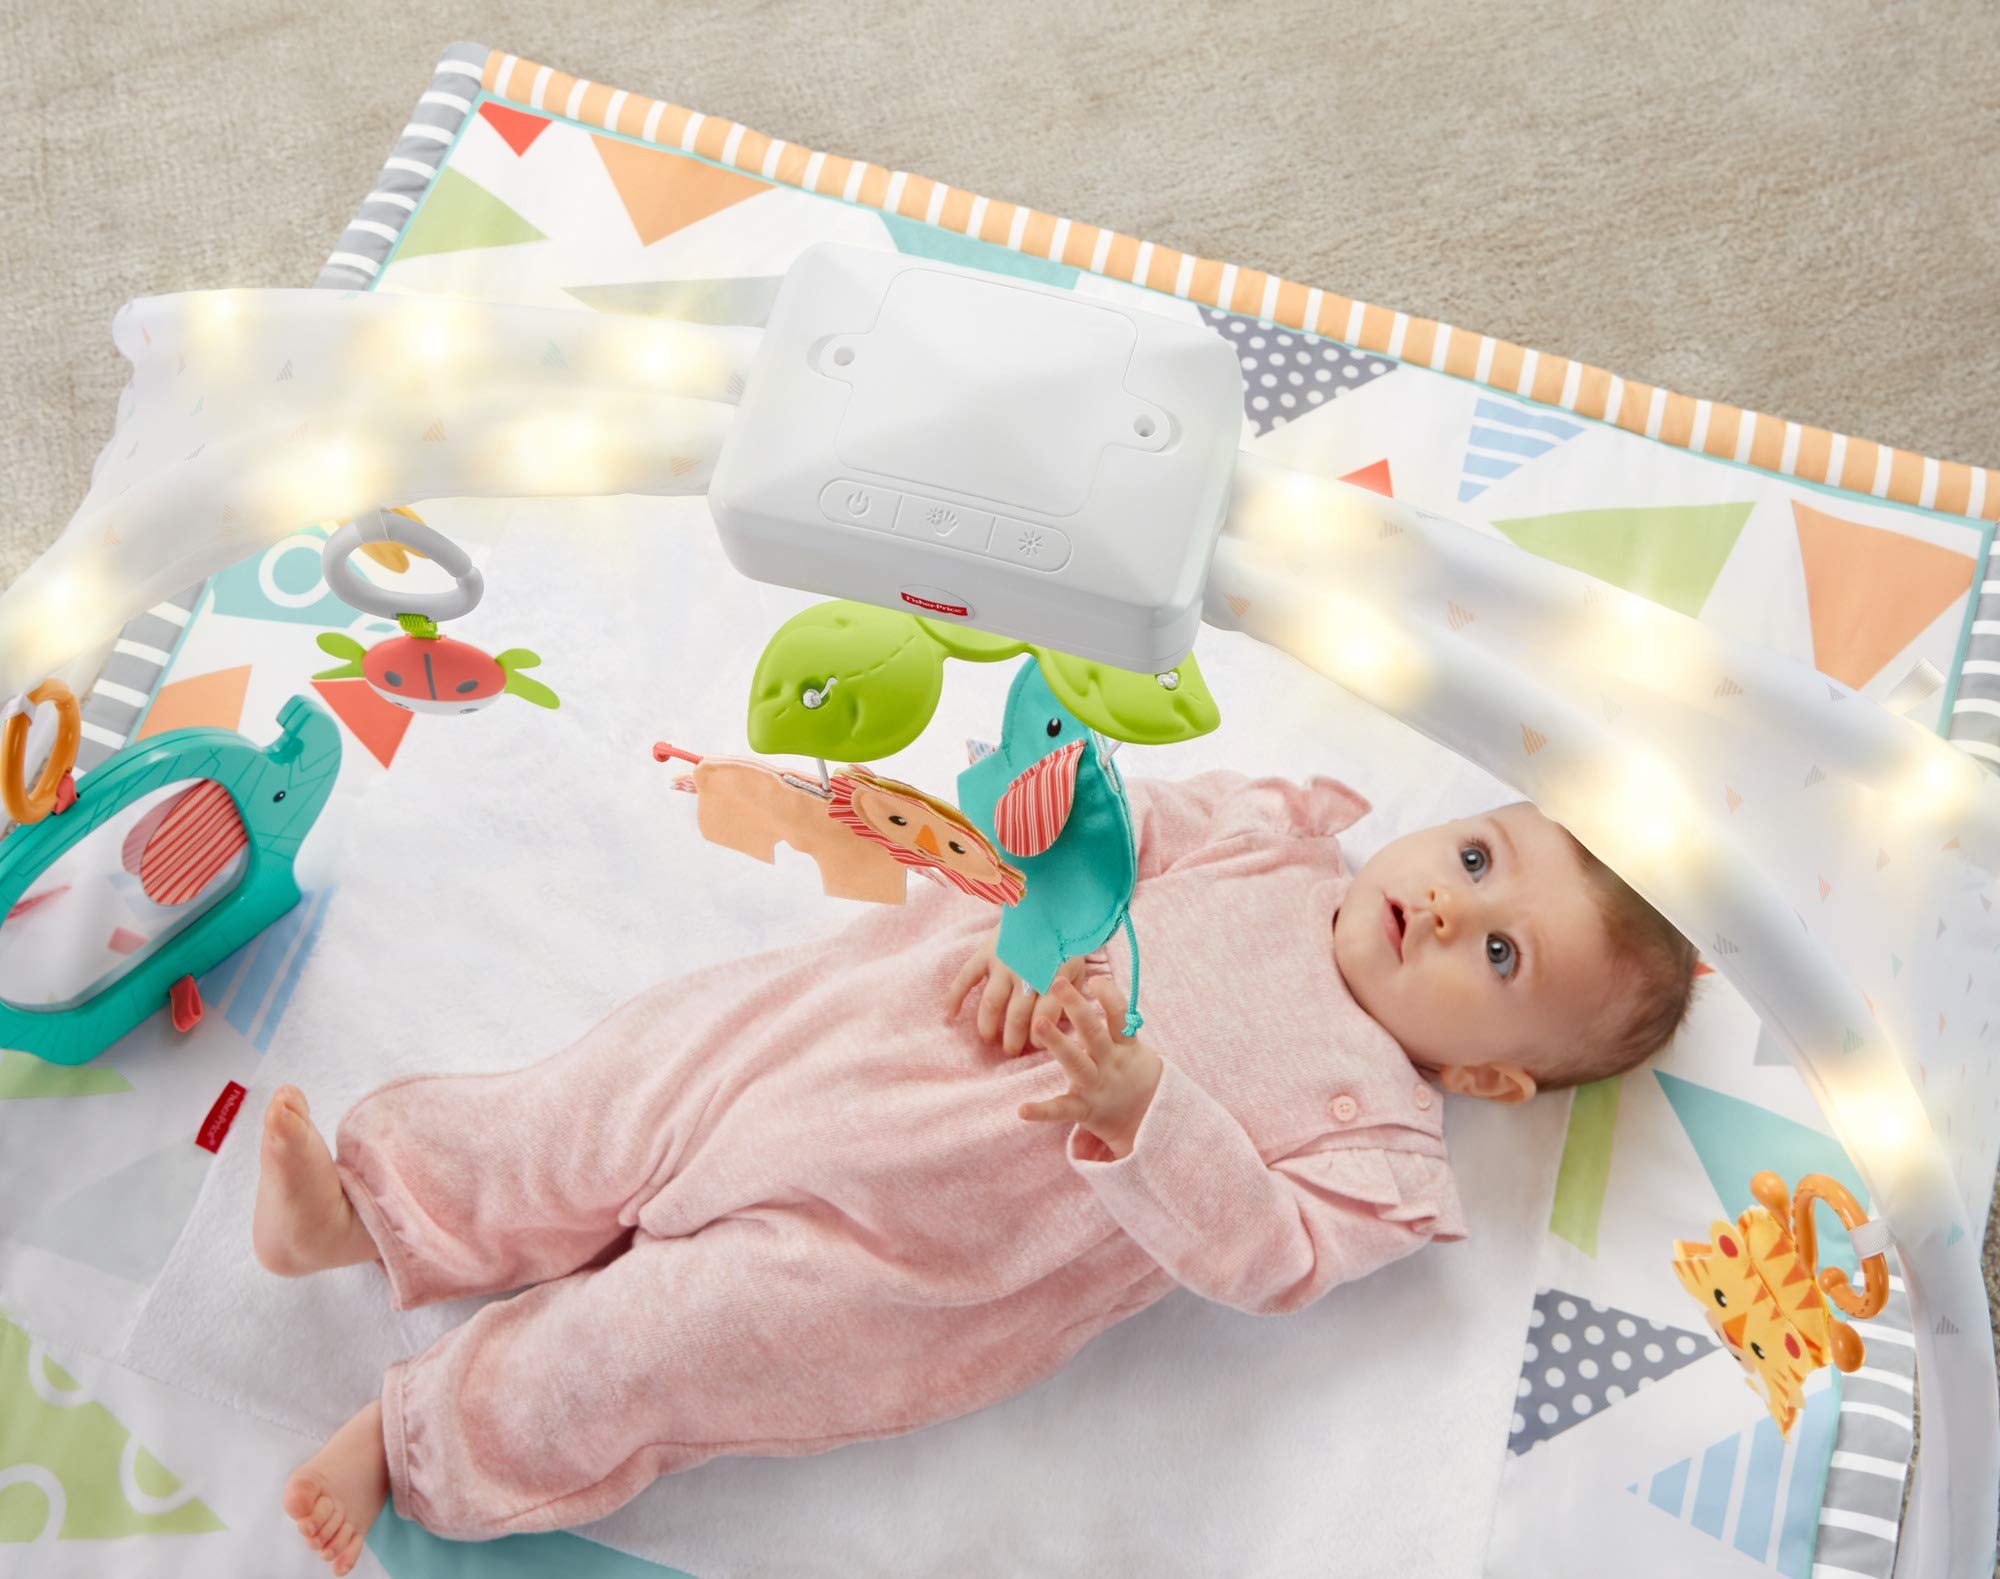 Fisher-Price Safari Music & Lights Gym Tummy Time Playmat with Take-Along Toys for Newborns from Birth and Older